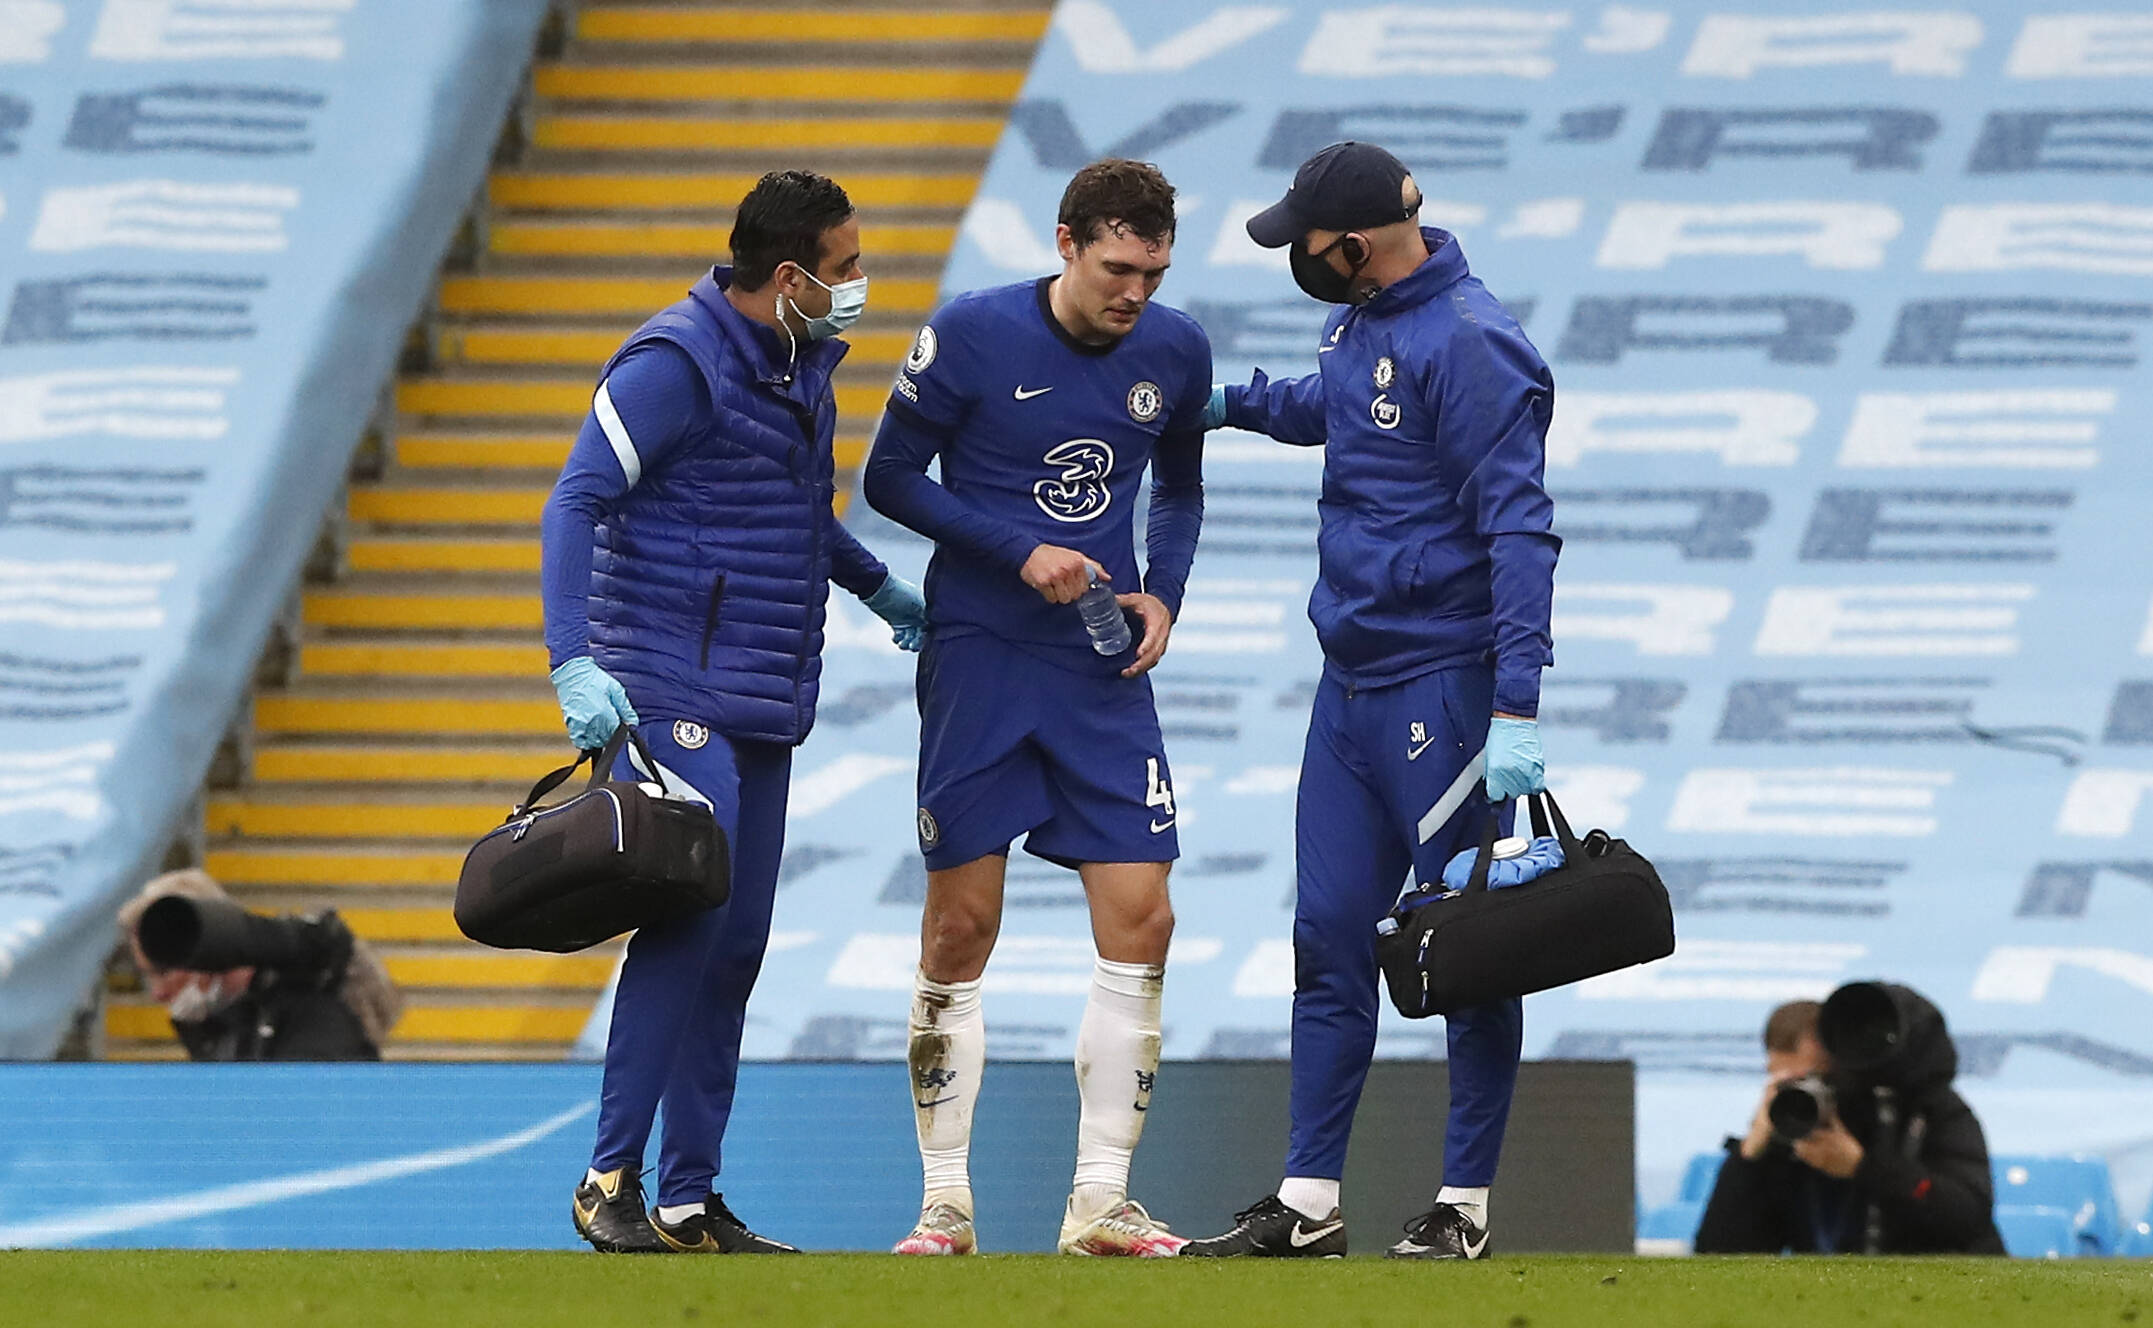 Thomas Tuchel provided an injury update on Chelsea defender, Andreas Christensen, after his fall against Manchester City.